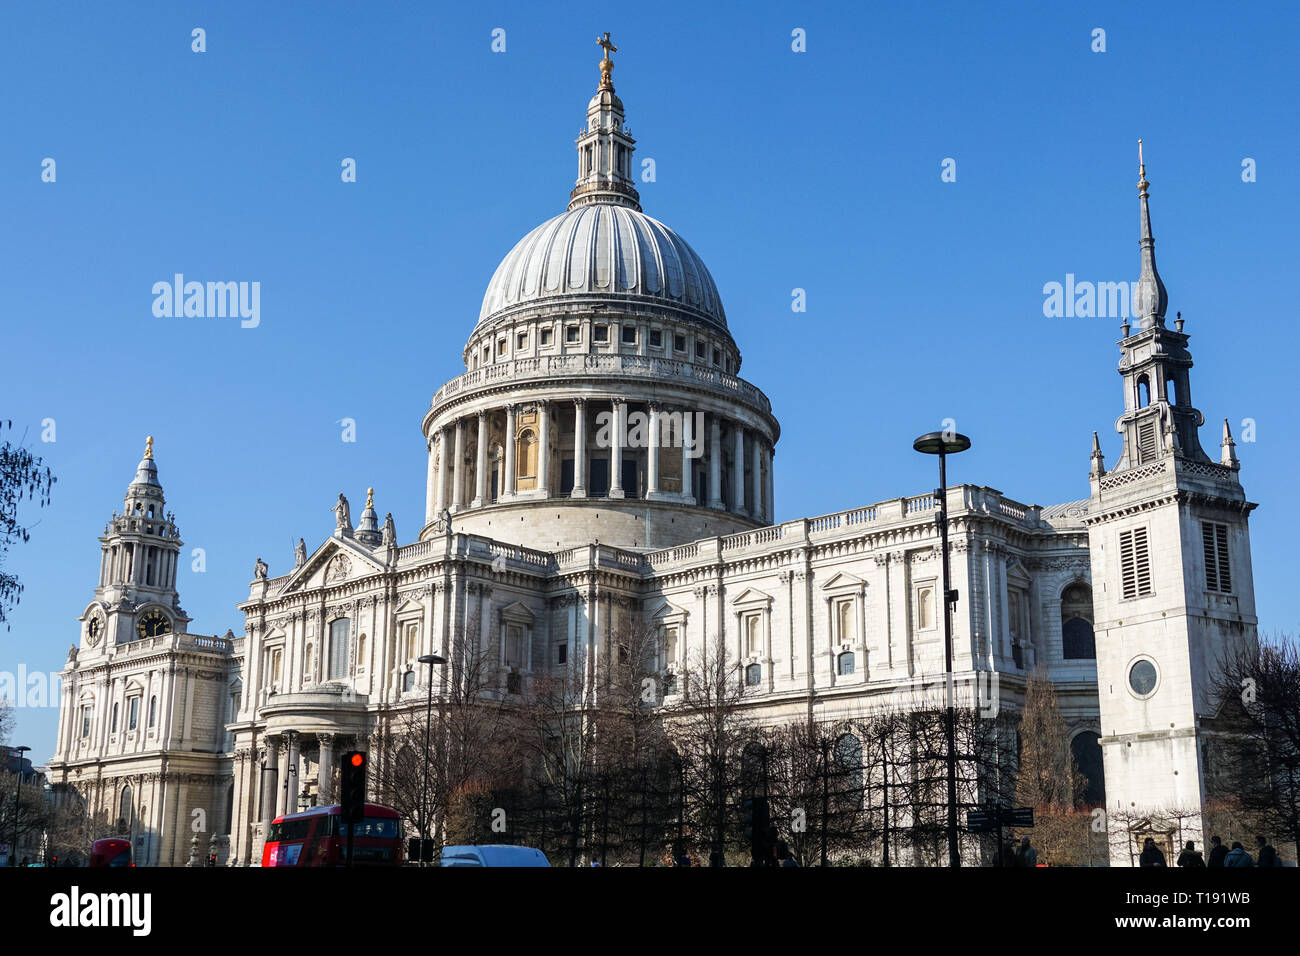 St Paul's Cathedral in London, England Großbritannien Stockfoto